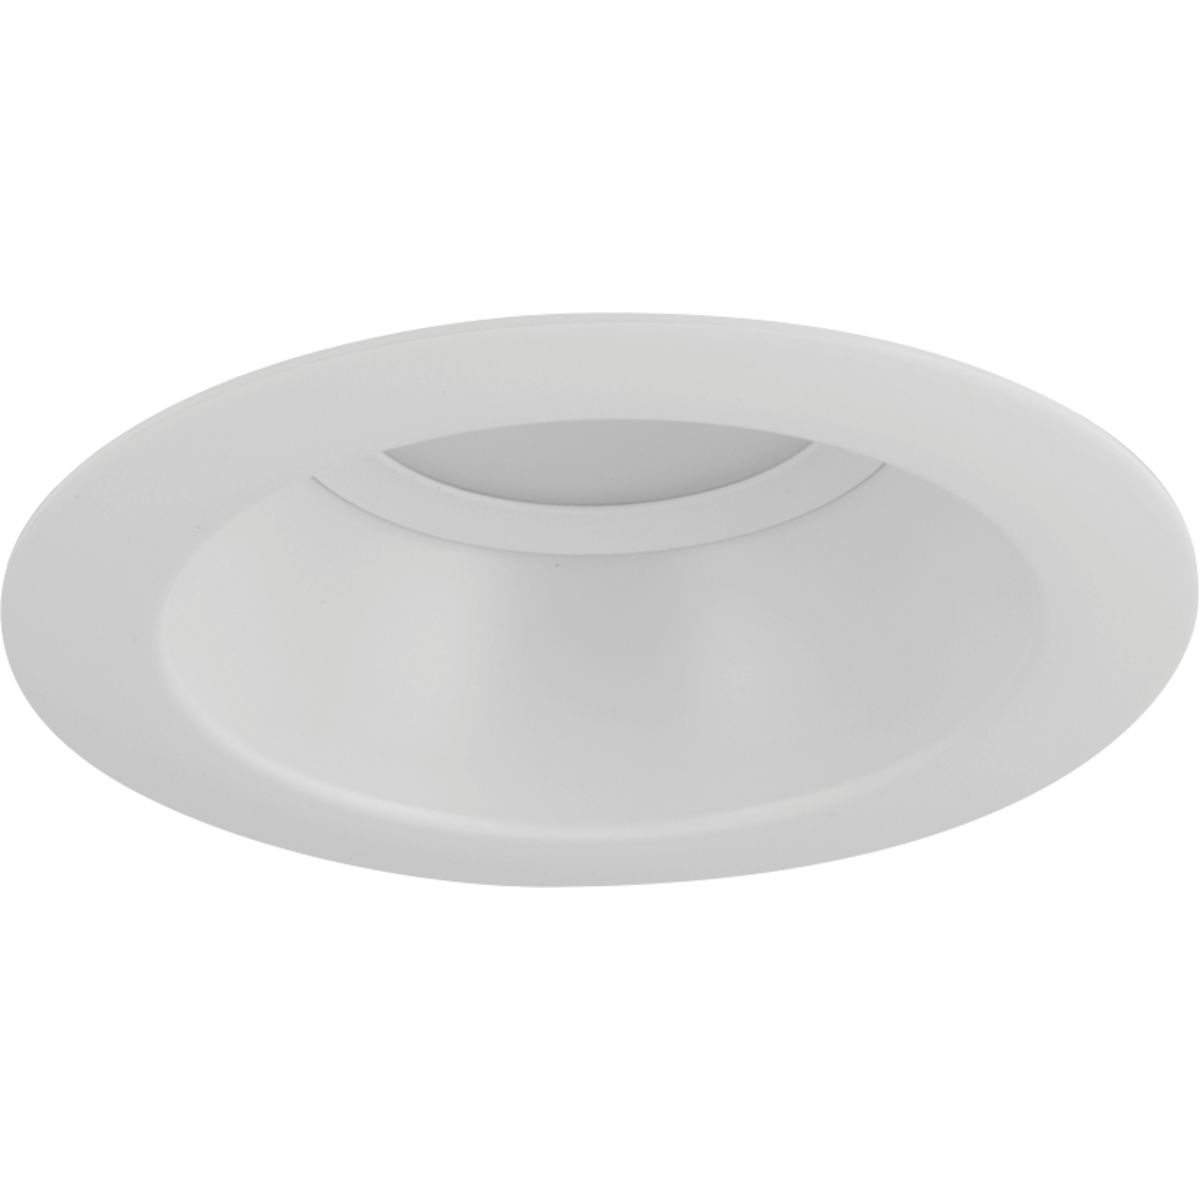 The 5 in P8061 is ideal for use in both new construction as well as remodel/retrofit. Light output is comparable to that of a typical 65W incandescent downlight, providing up to 75 percent energy savings. The P8061 is equipped with both Edison base adapter and quick link connector allowing easy installation in many standard incandescent recessed housings. White finish.